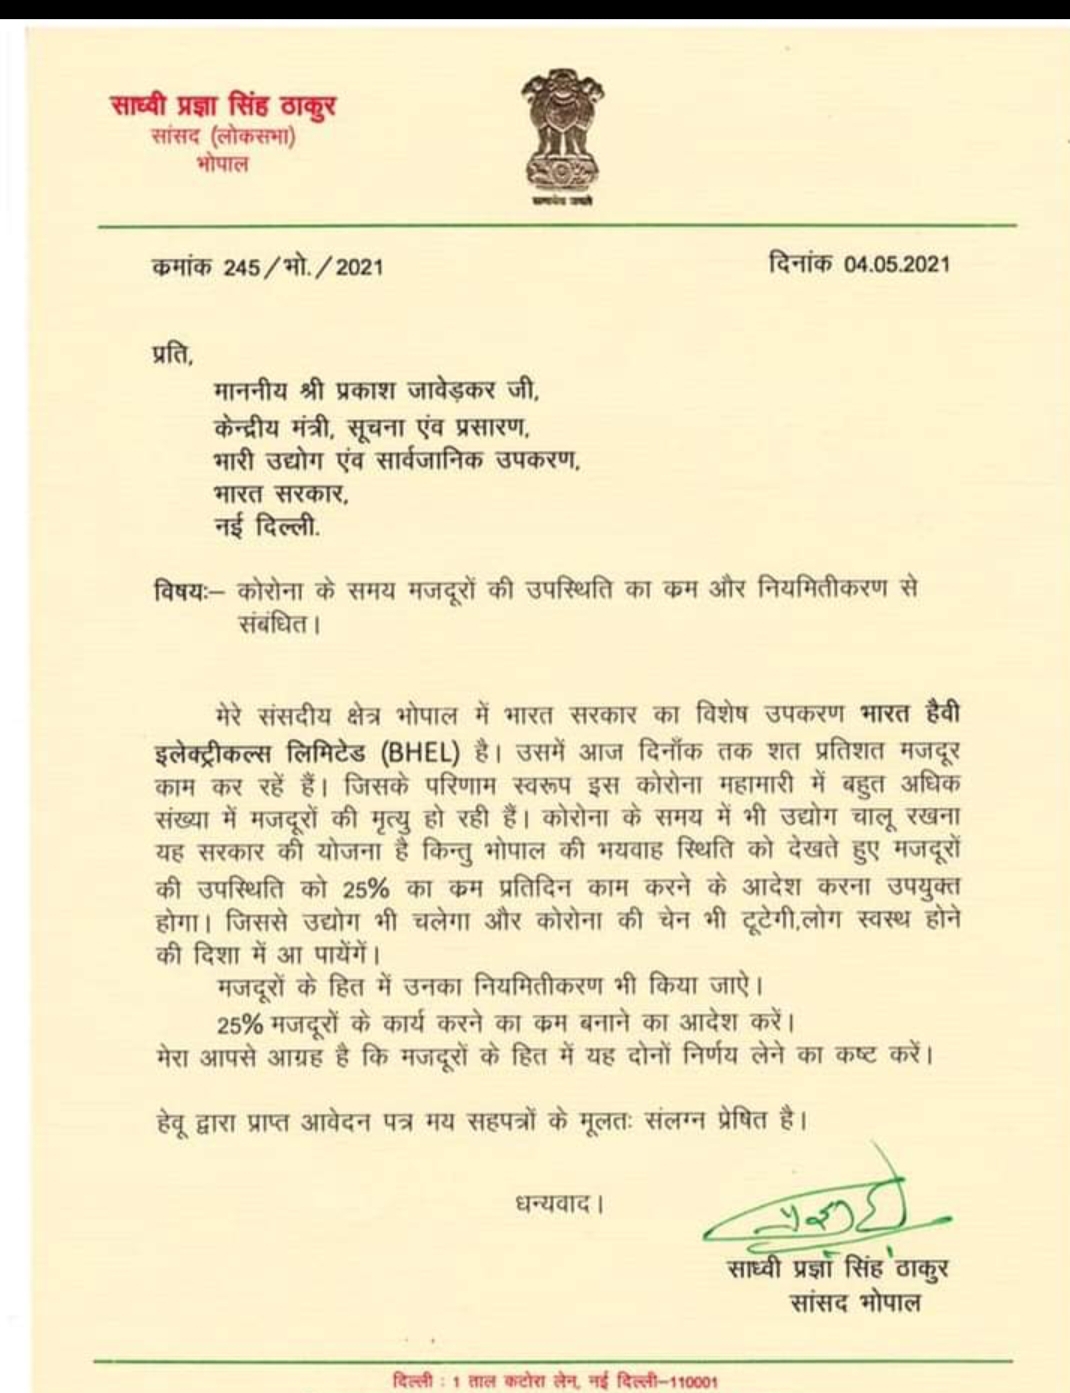 Letter written to the union minister